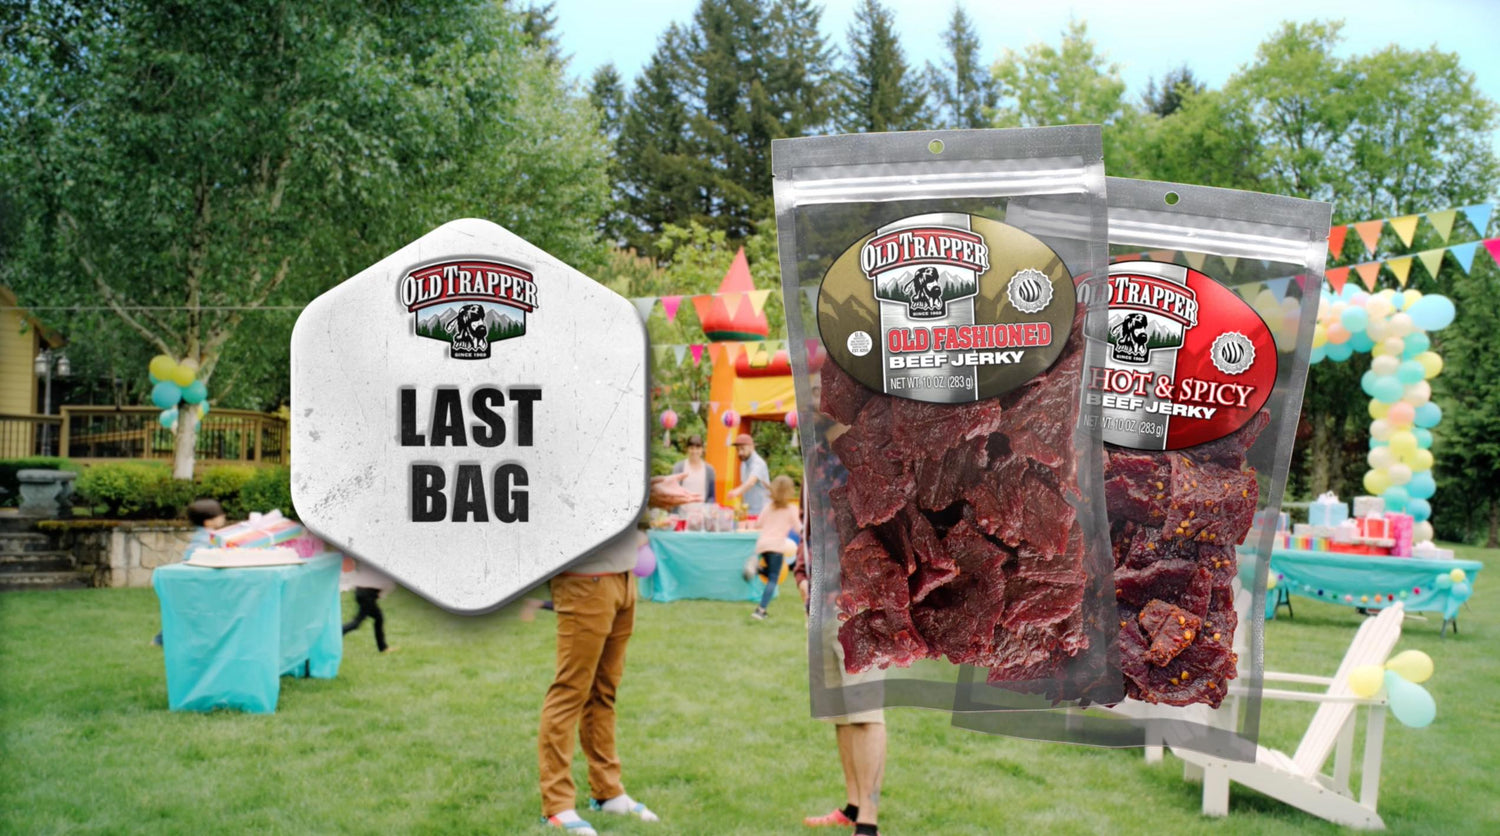 #TrapperBeefs: Last Bag (Extended Edition)